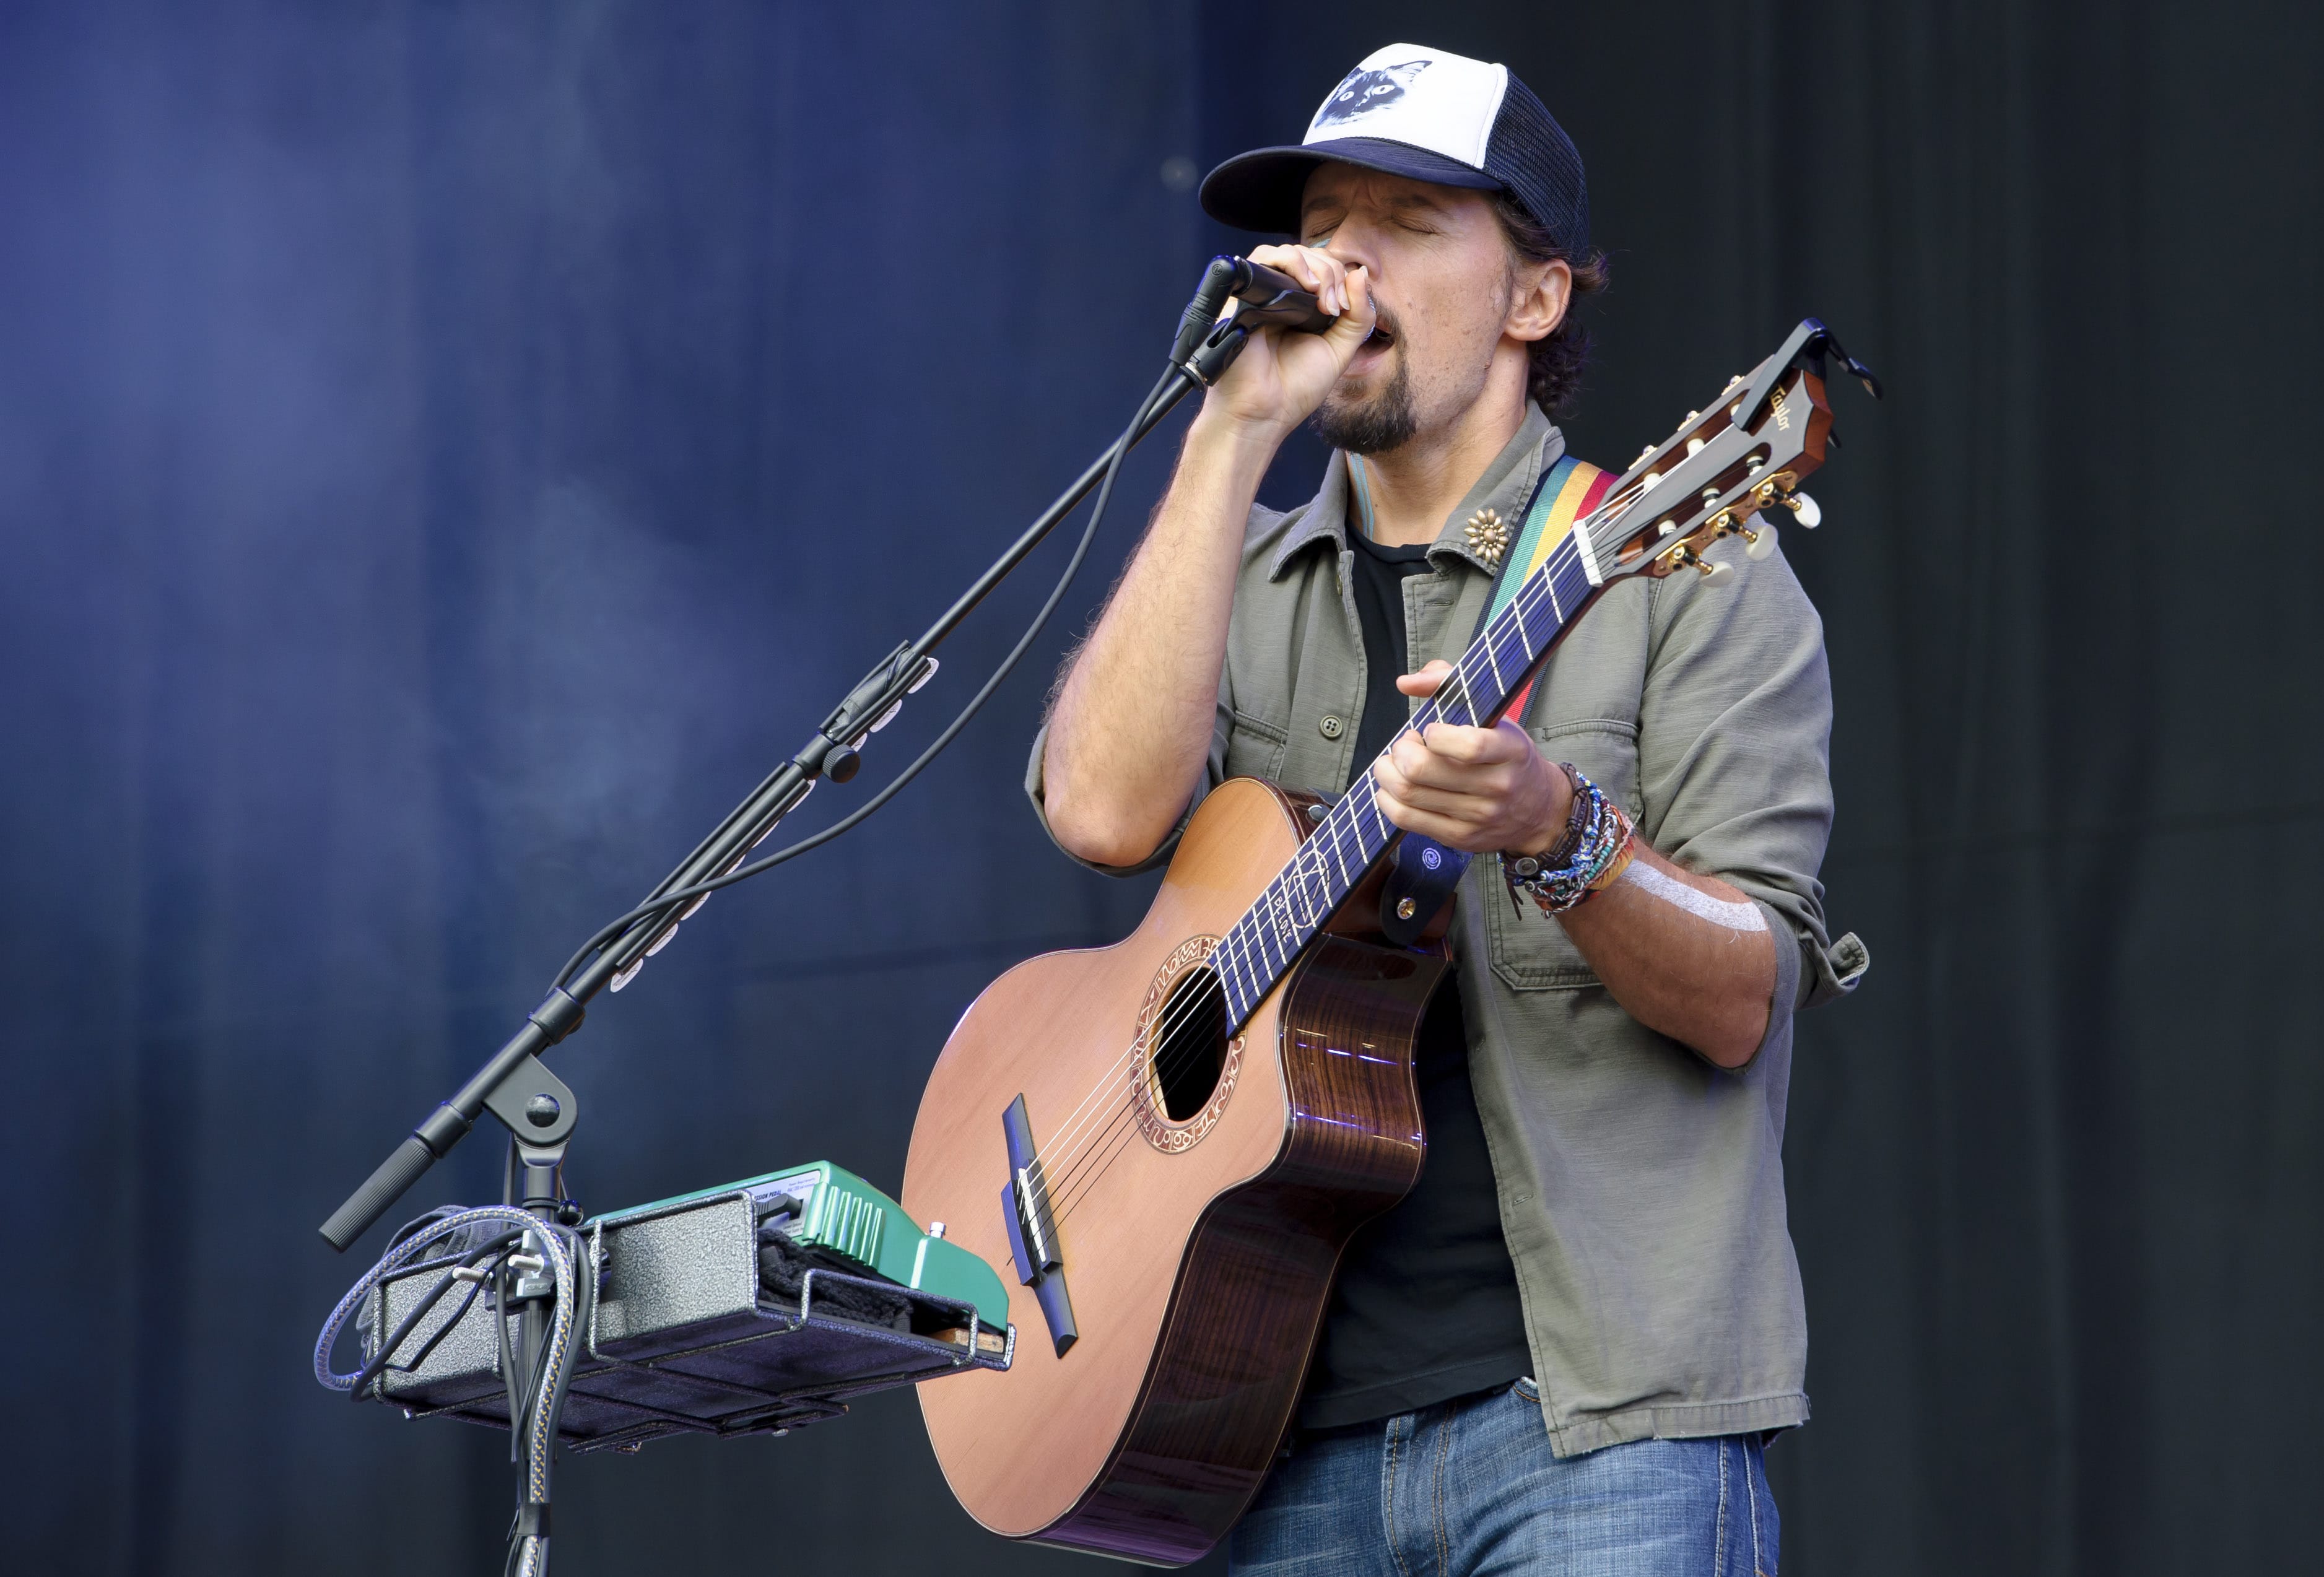 Invision files
Jason Mraz performs Aug. 18, 2013, at the V Festival in Chelmsford, England.